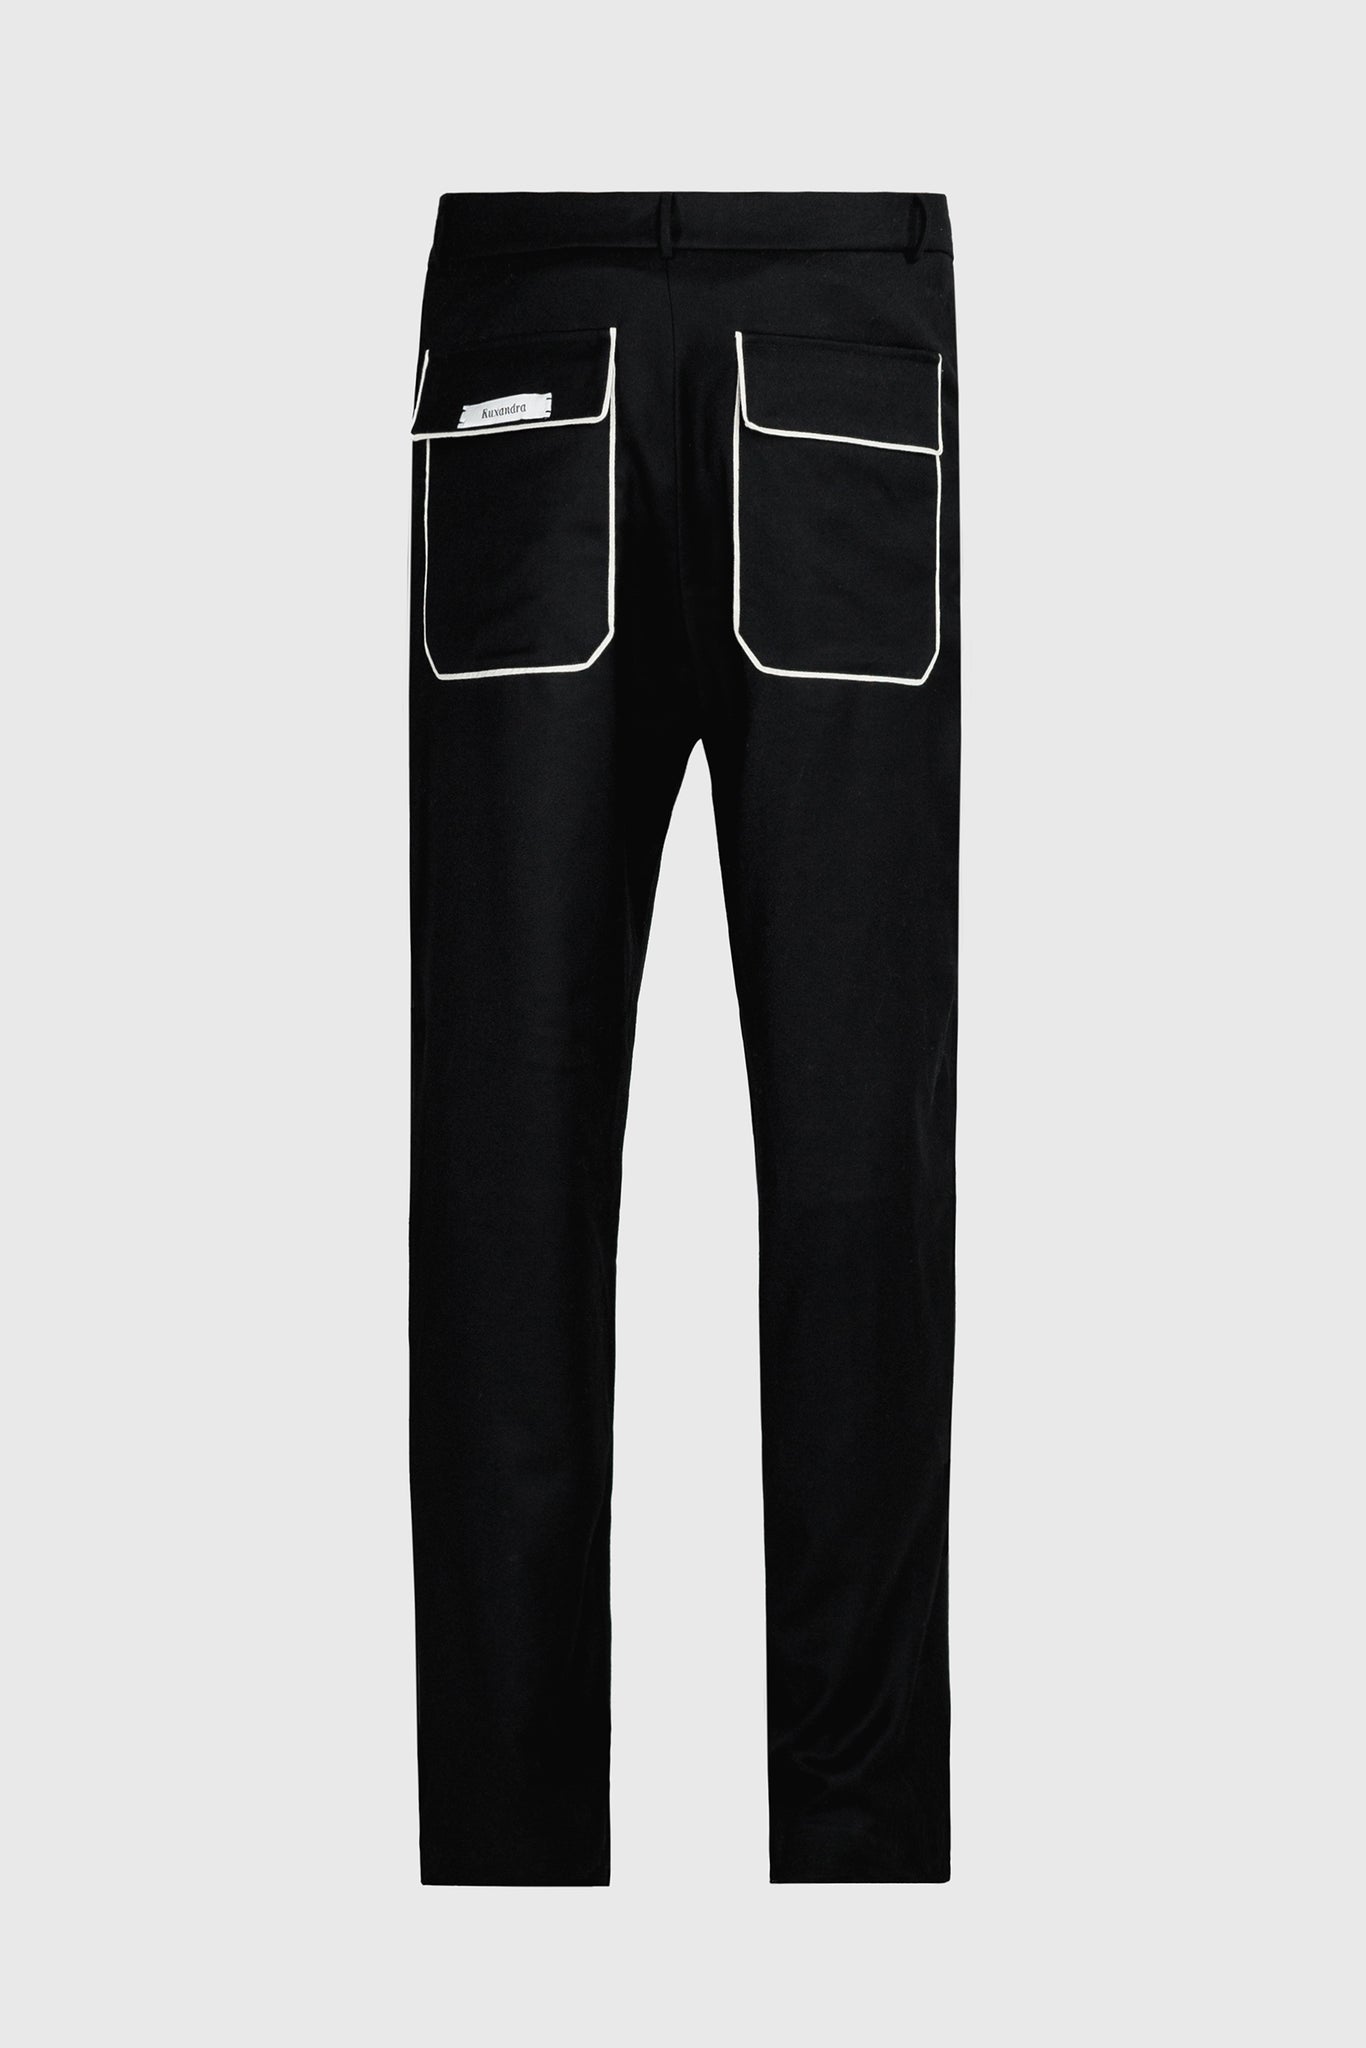 Ruxandra, straight-leg men's trousers, 400gr wool, perfect architects outfit, geometric style and details, recognizable details, white piping on black, with belt loops and rear jetted poclets concealed fly and button fastening, leather covered button.